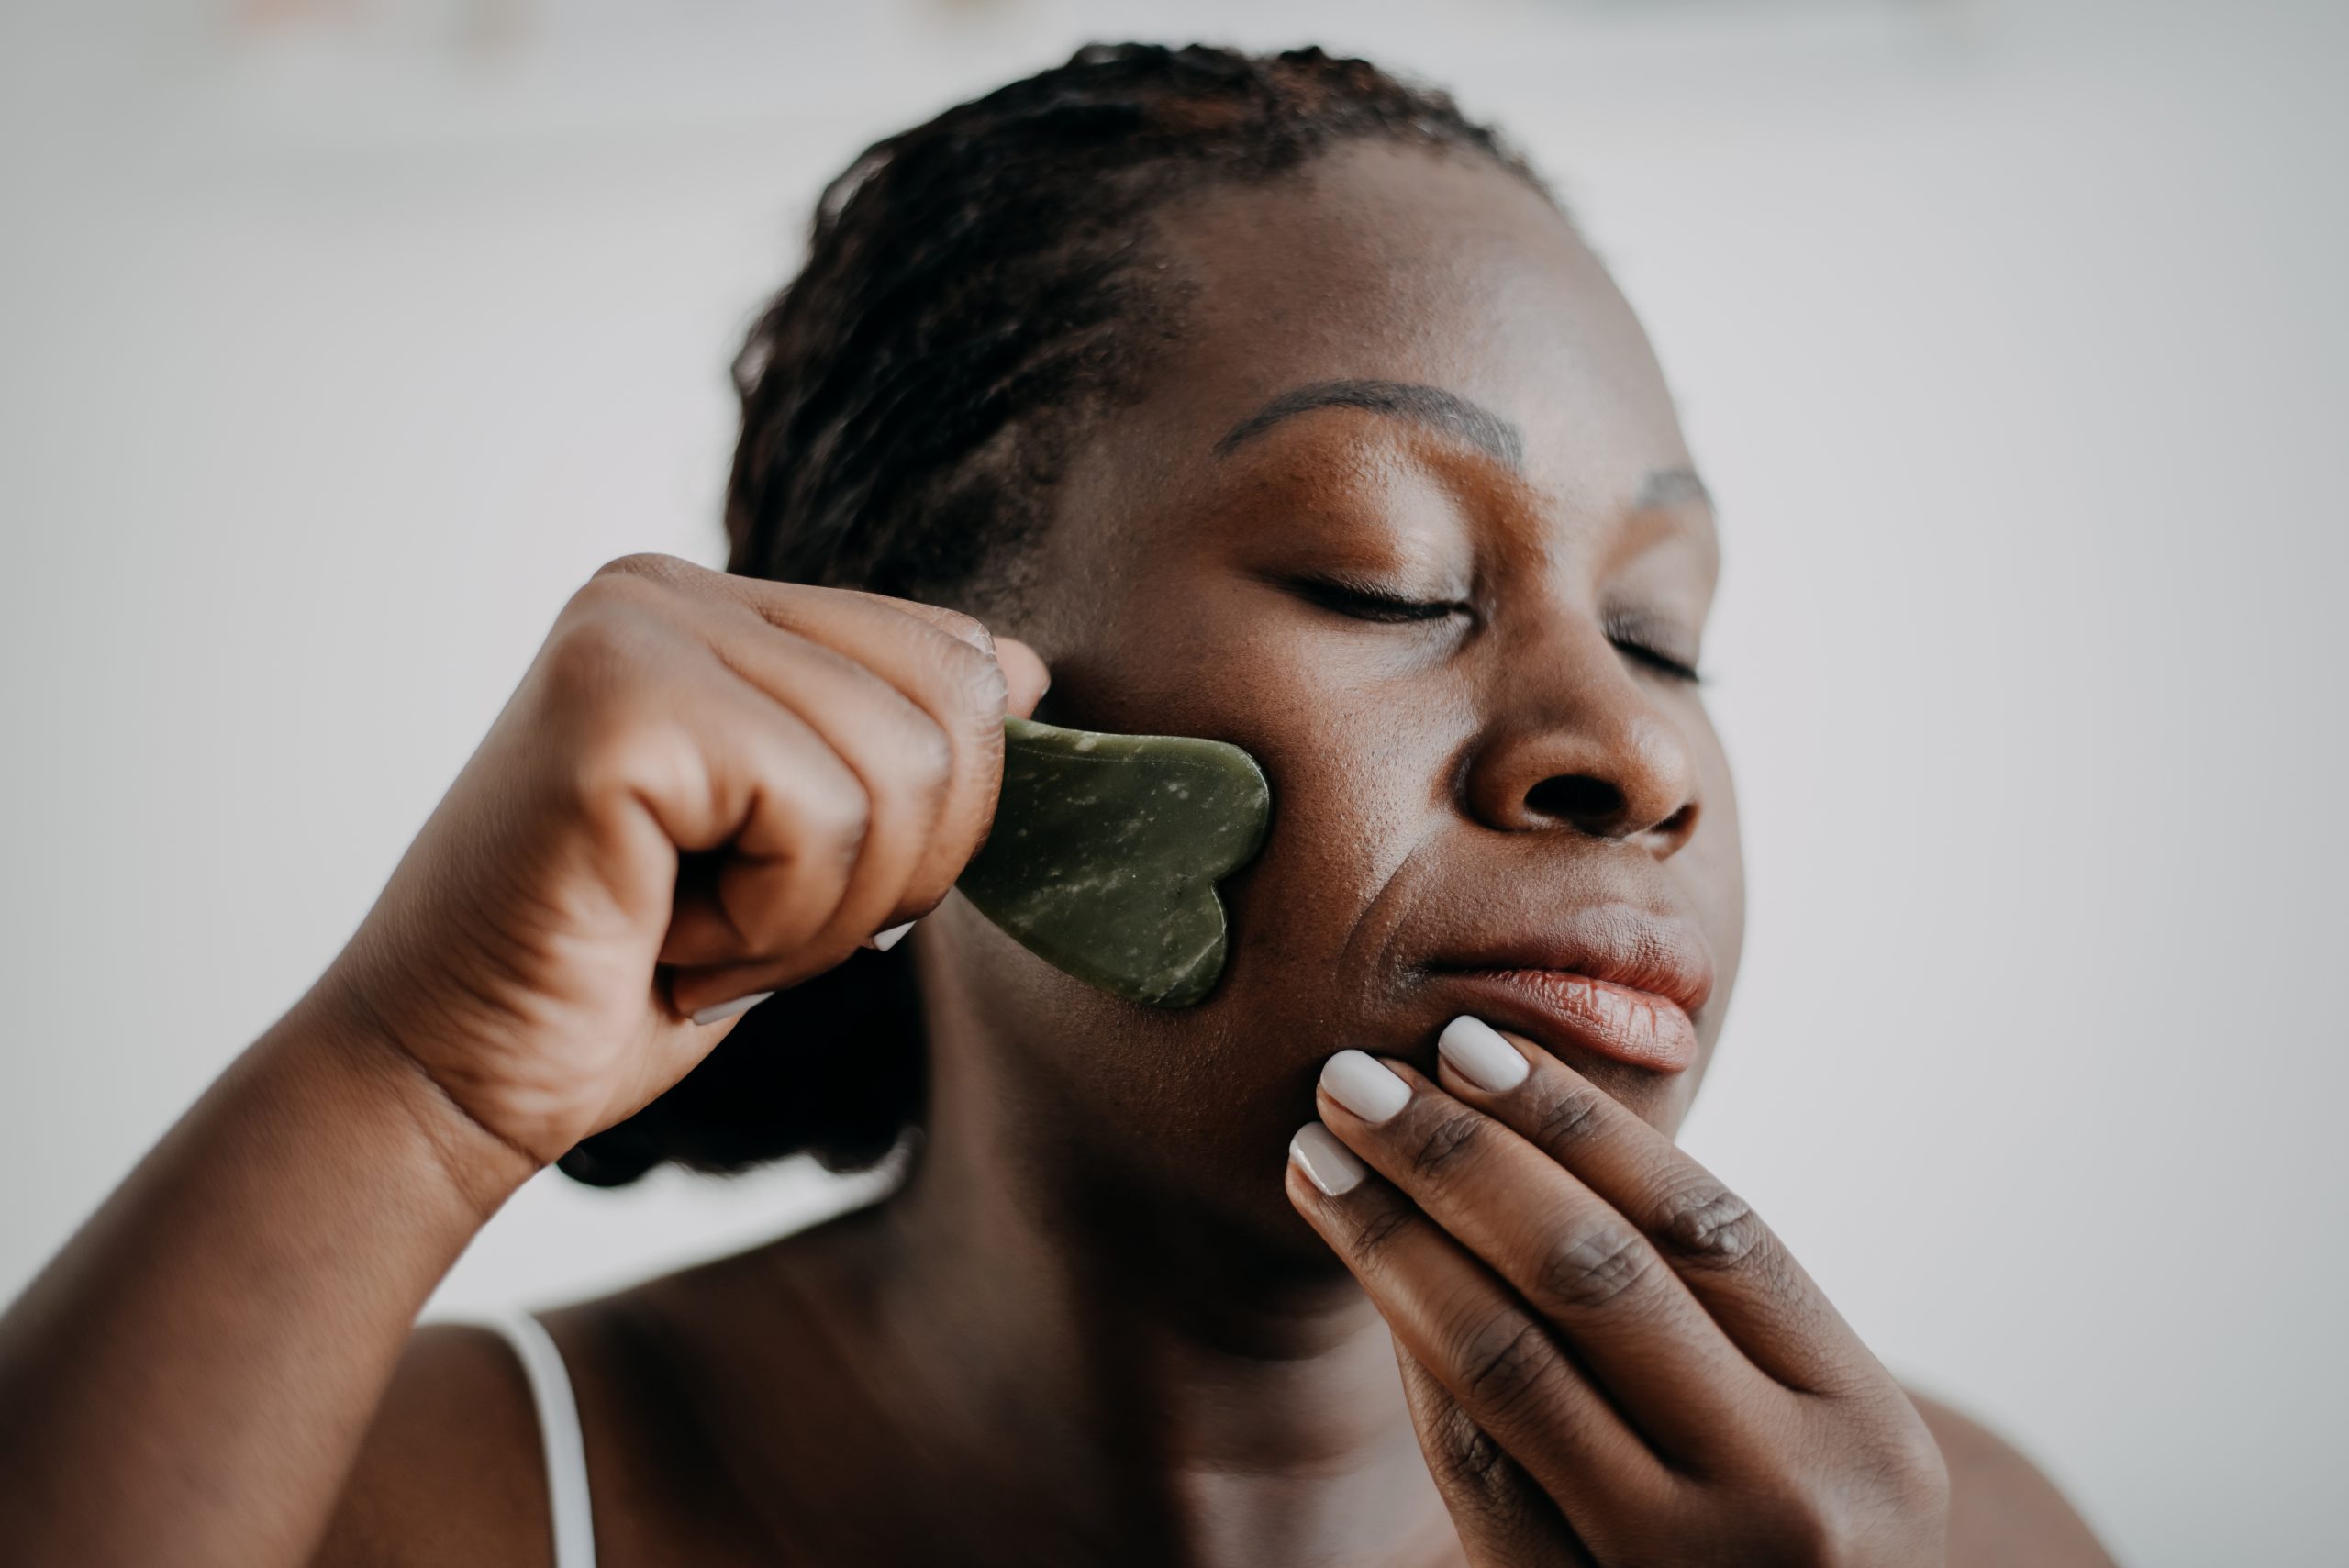 A woman demonstrates how a gua sha tool is used on the face. (Getty Images)